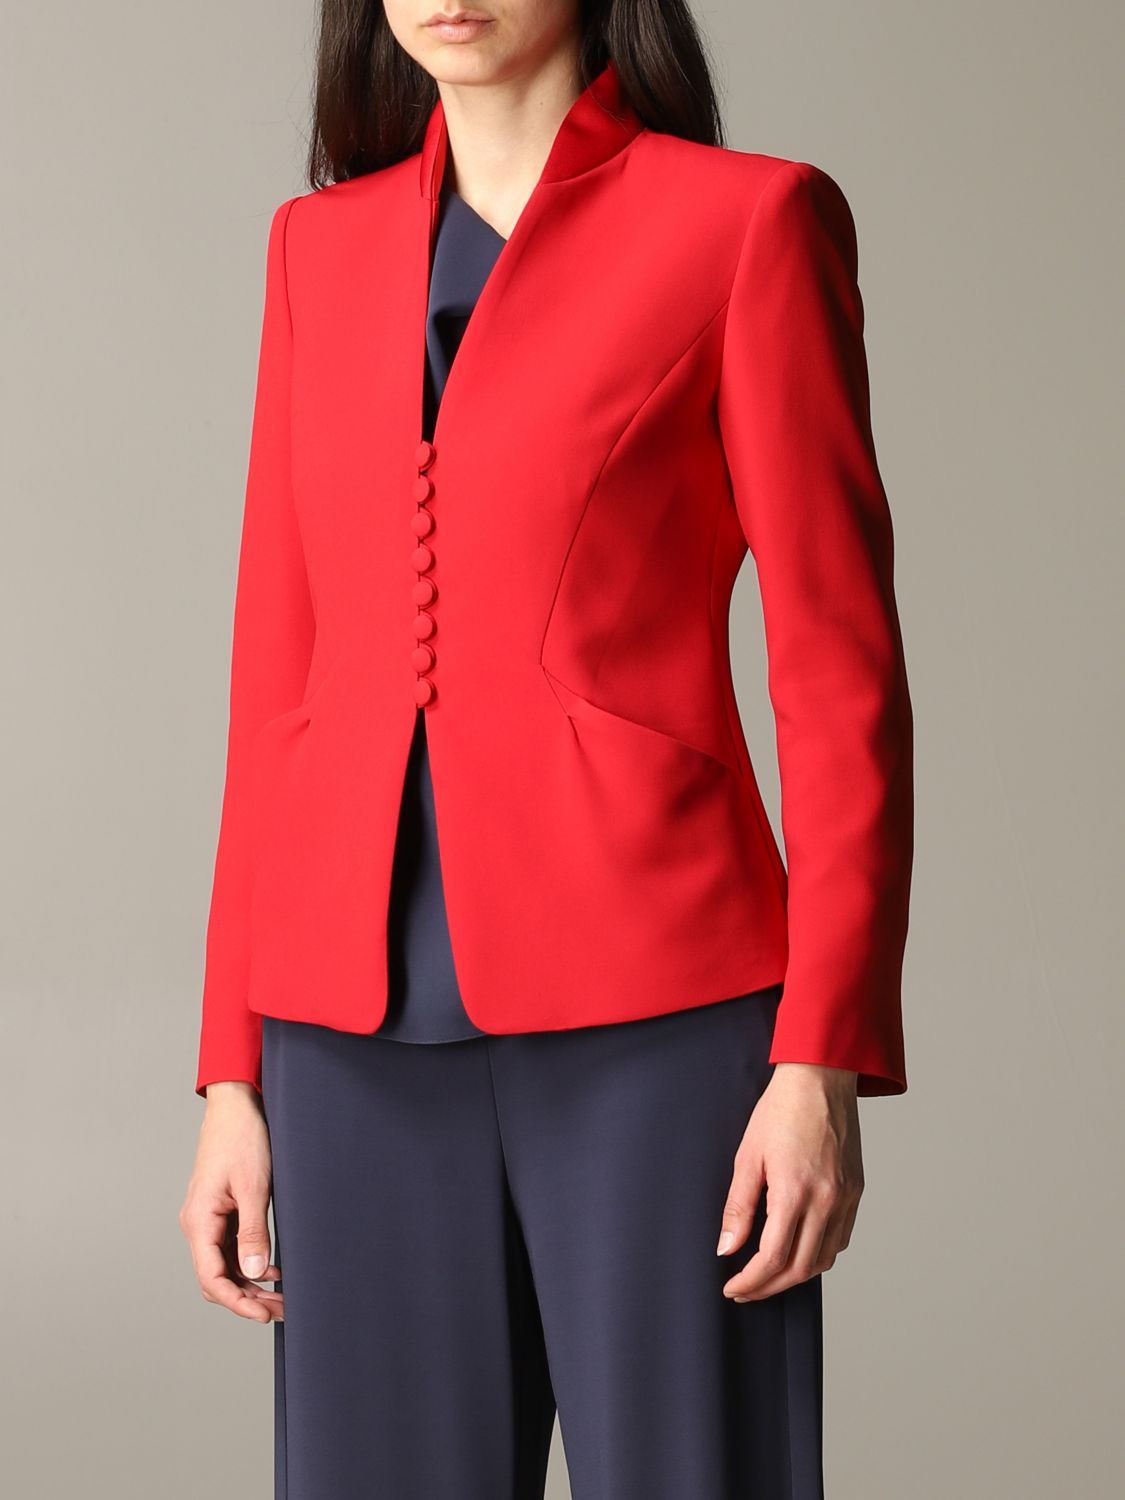 armani red suit